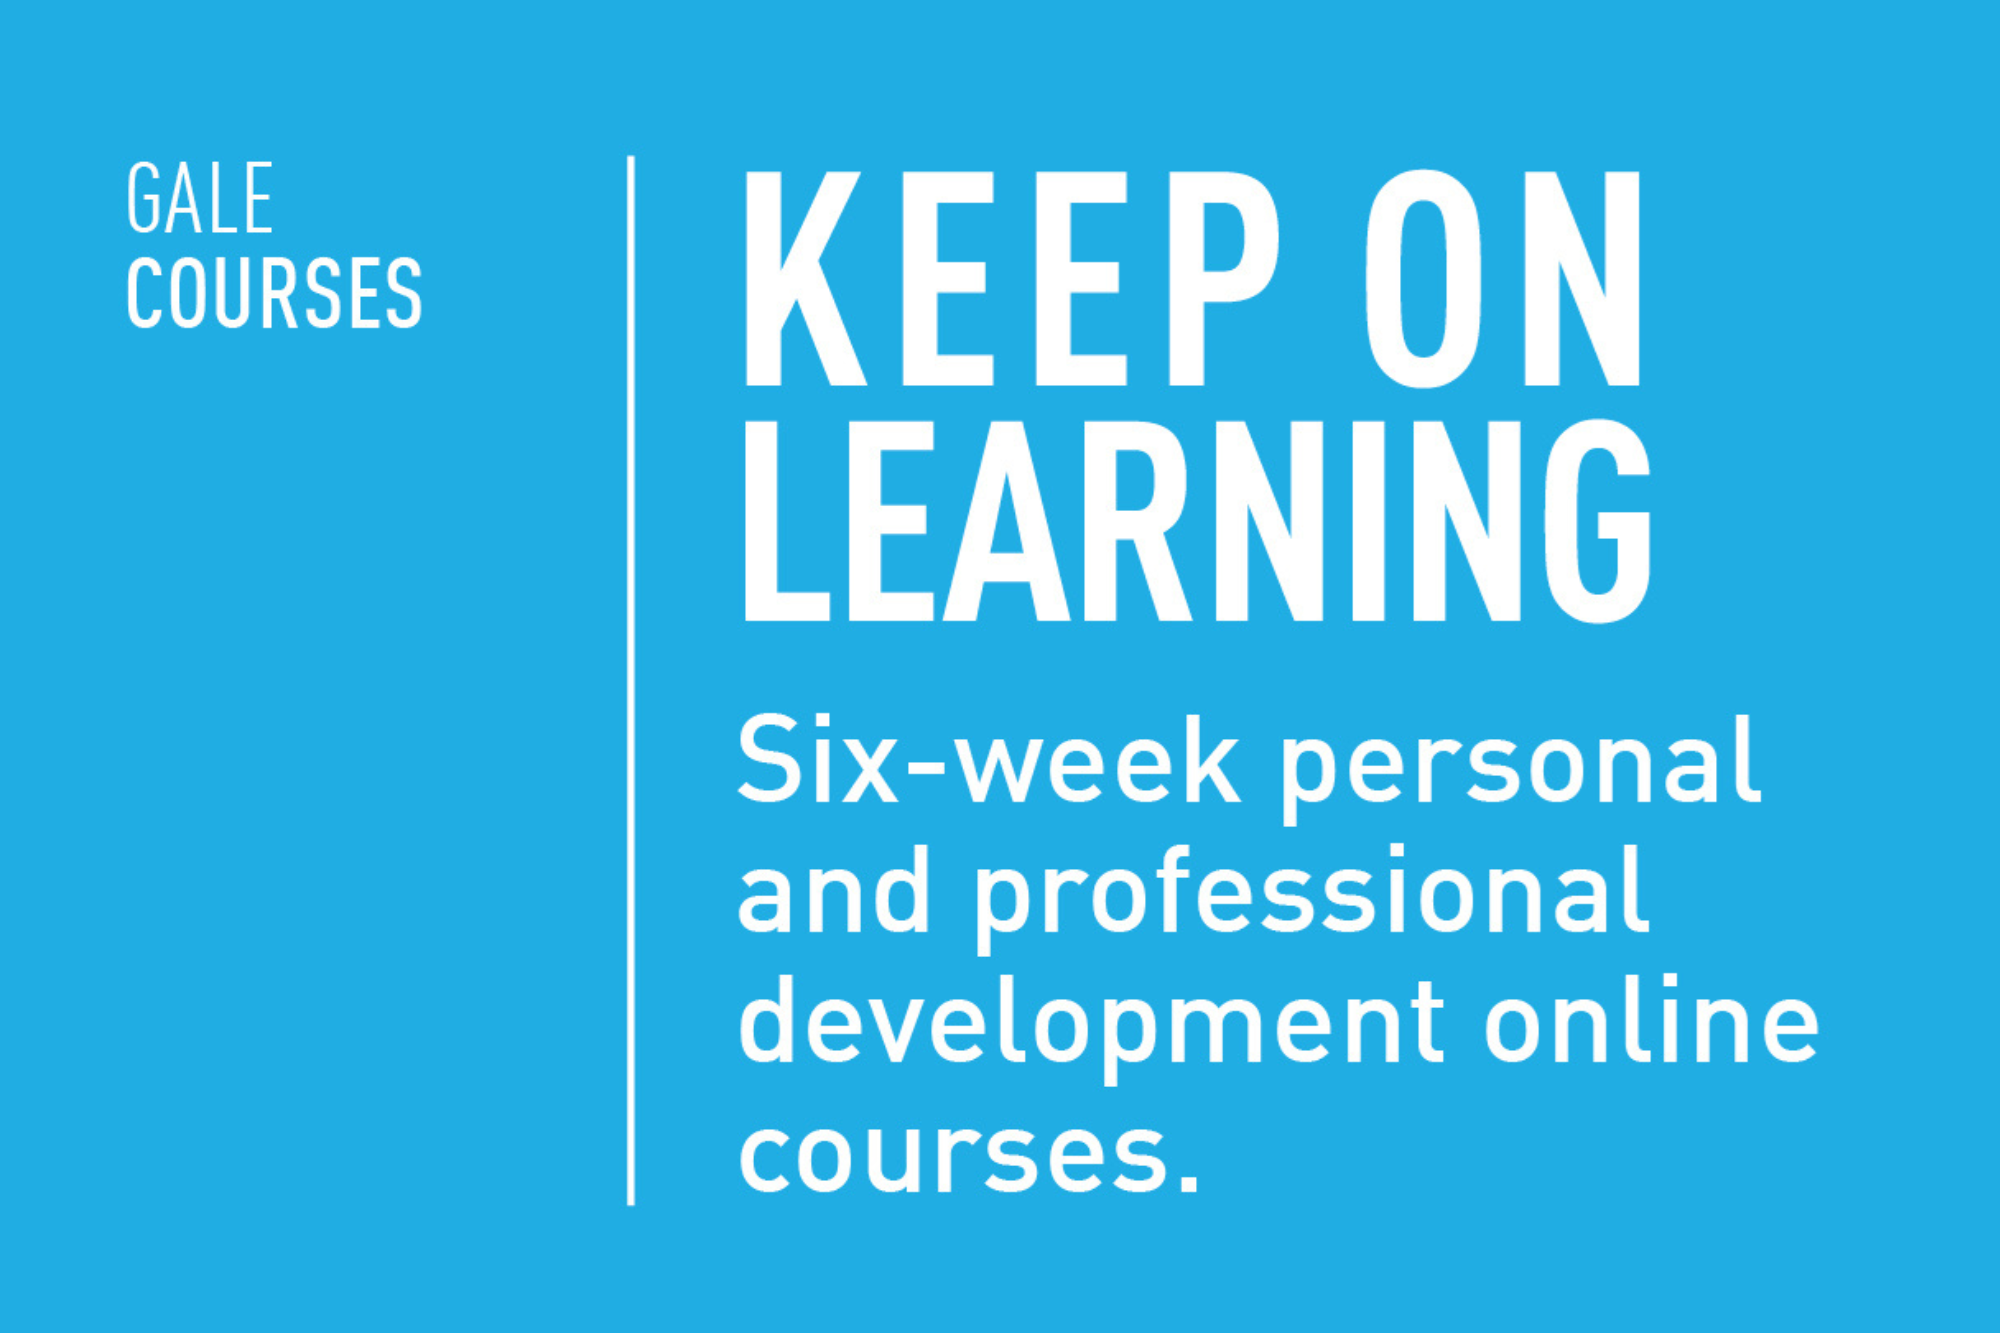 Text reads, "Gale Courses. Keep On Learning. Six-week personal and professional development online courses."